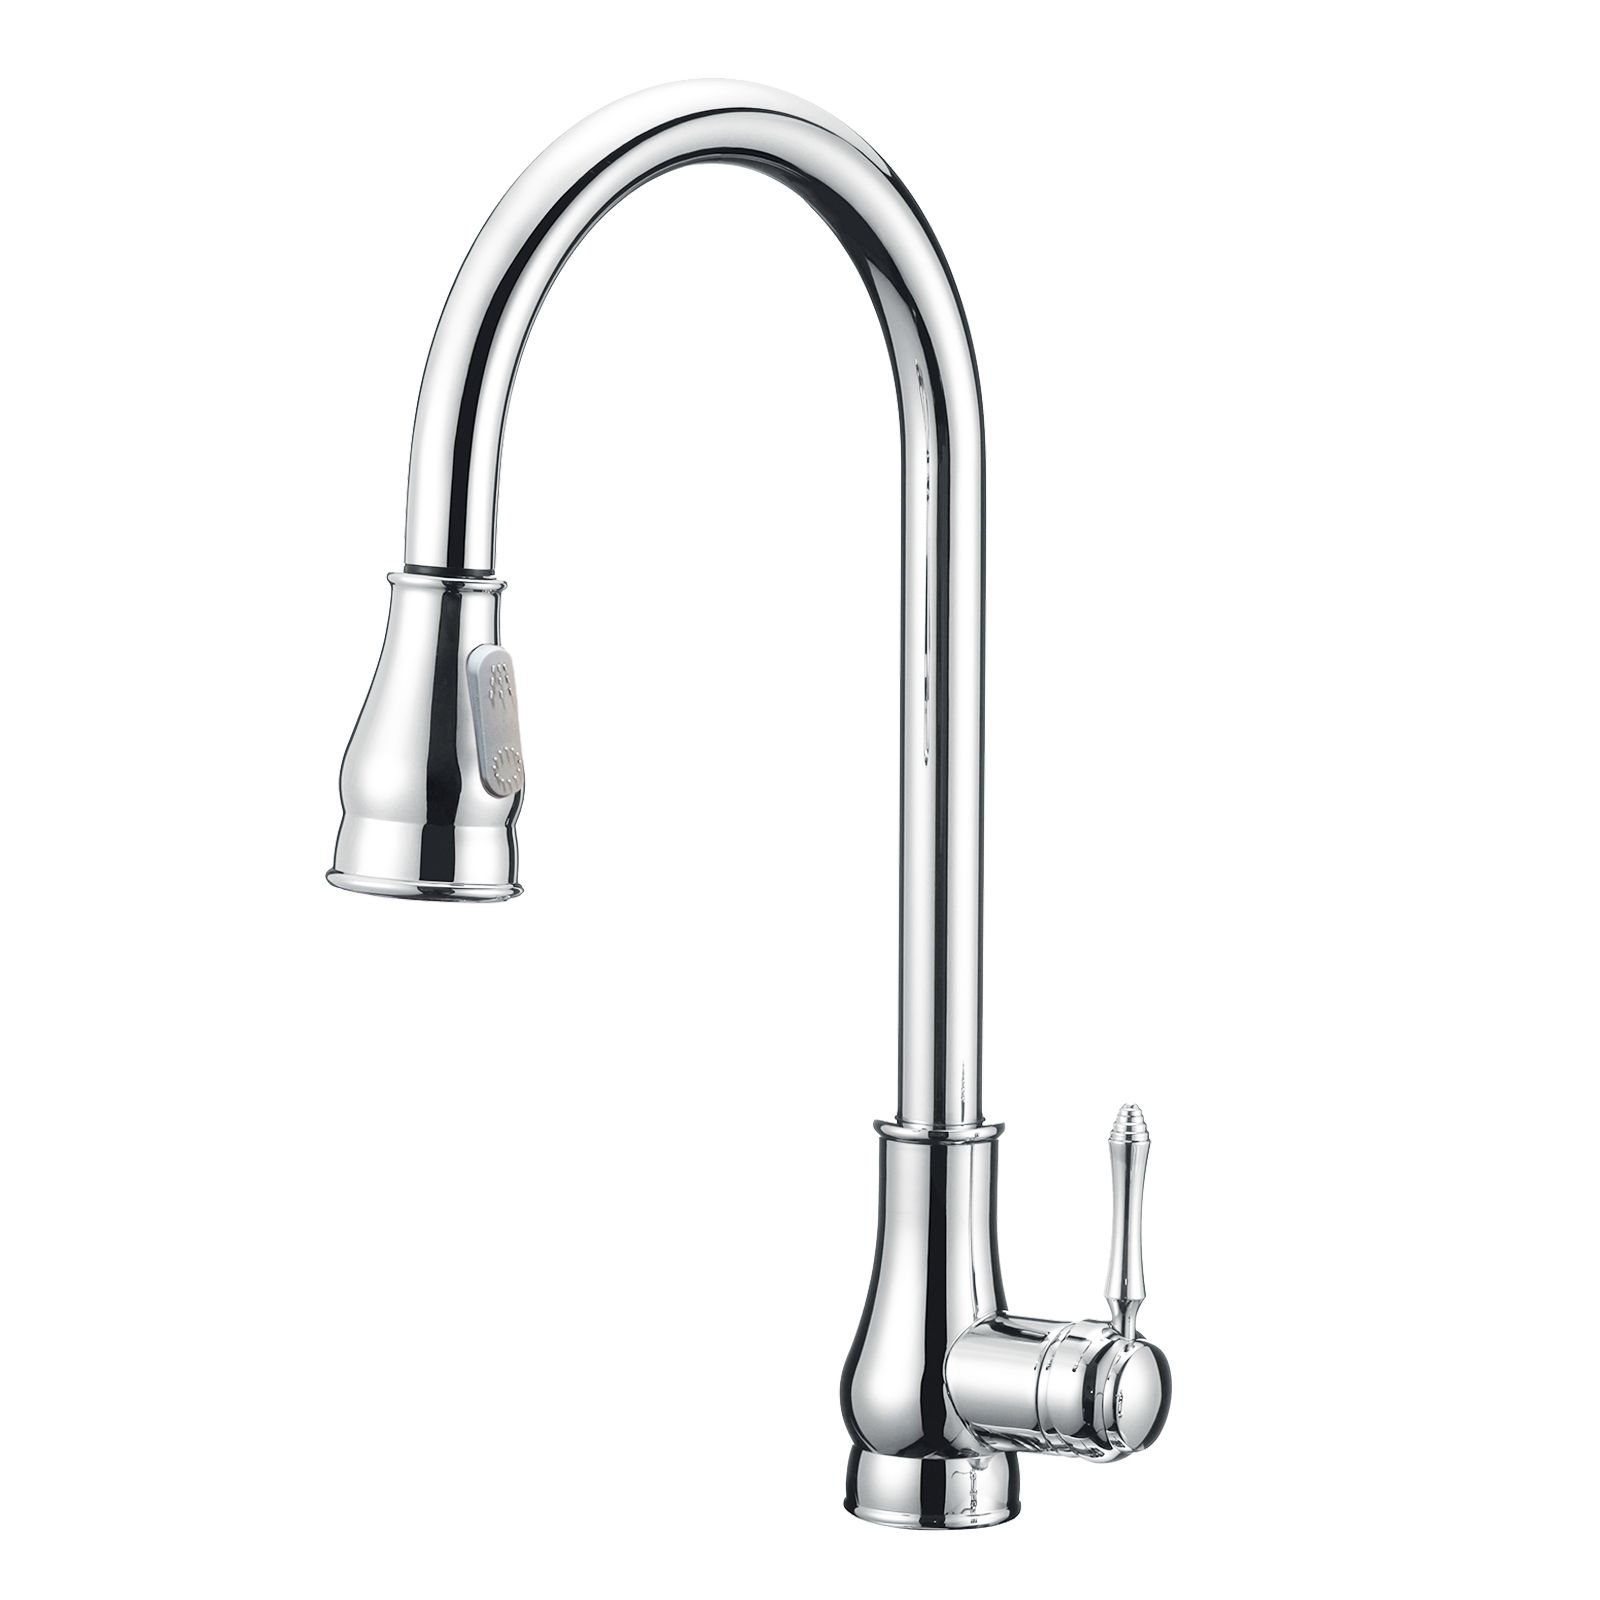 Aquaperla Euro Round Chrome Vintage 360° Swivel Pull Out Kitchen Sink Mixer Tap Solid Brass